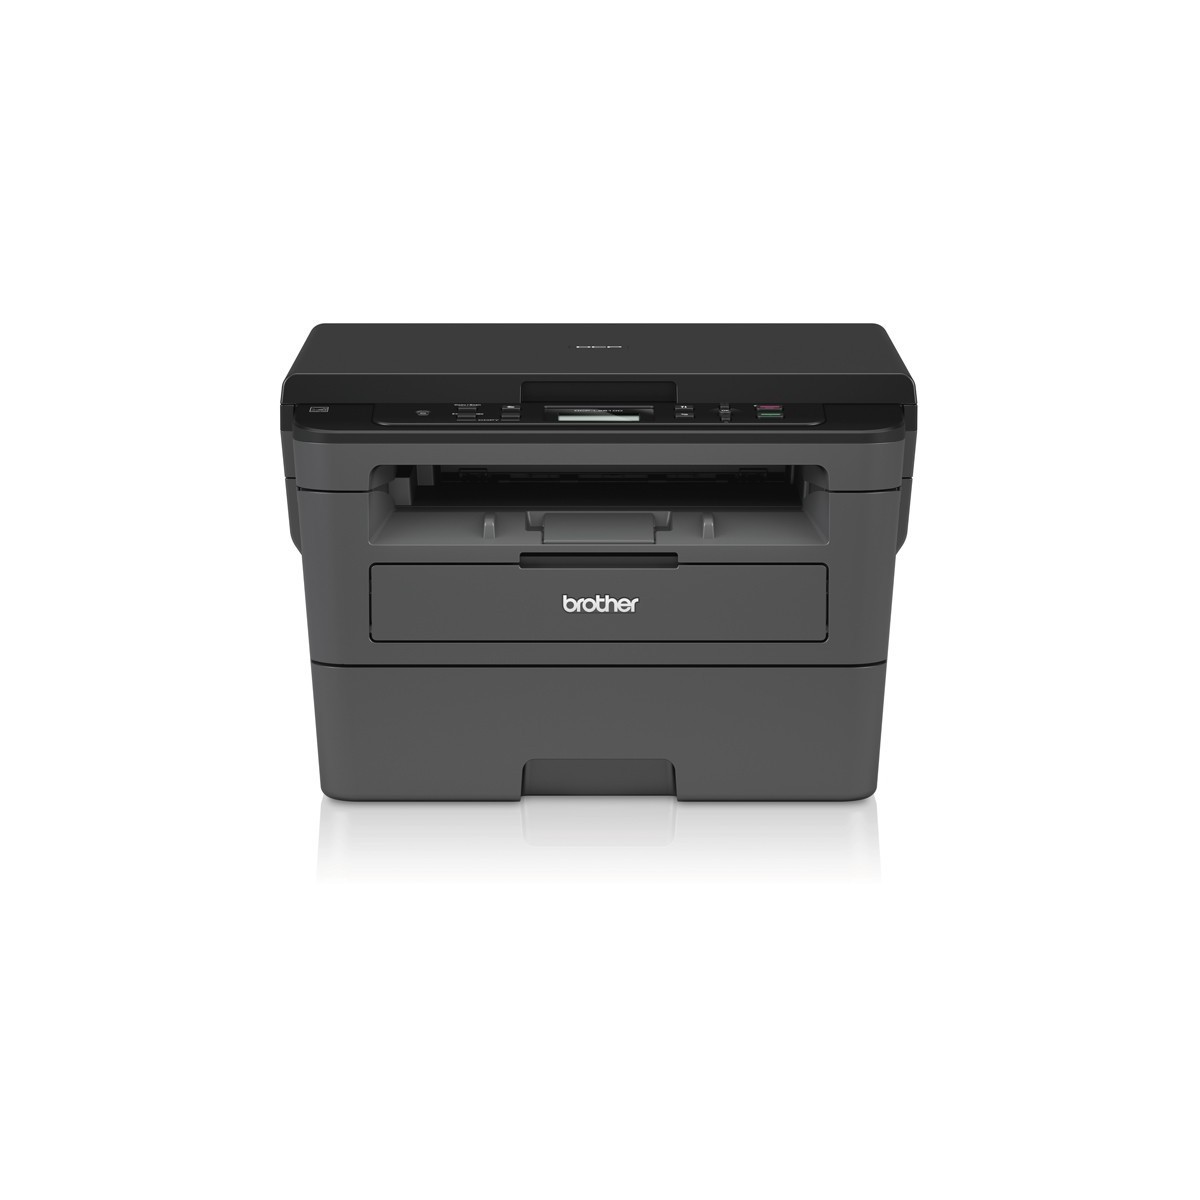 Brother DCP-L2510D MULTIFUNCTION DCP - Multifunction Printer - Laser/Led